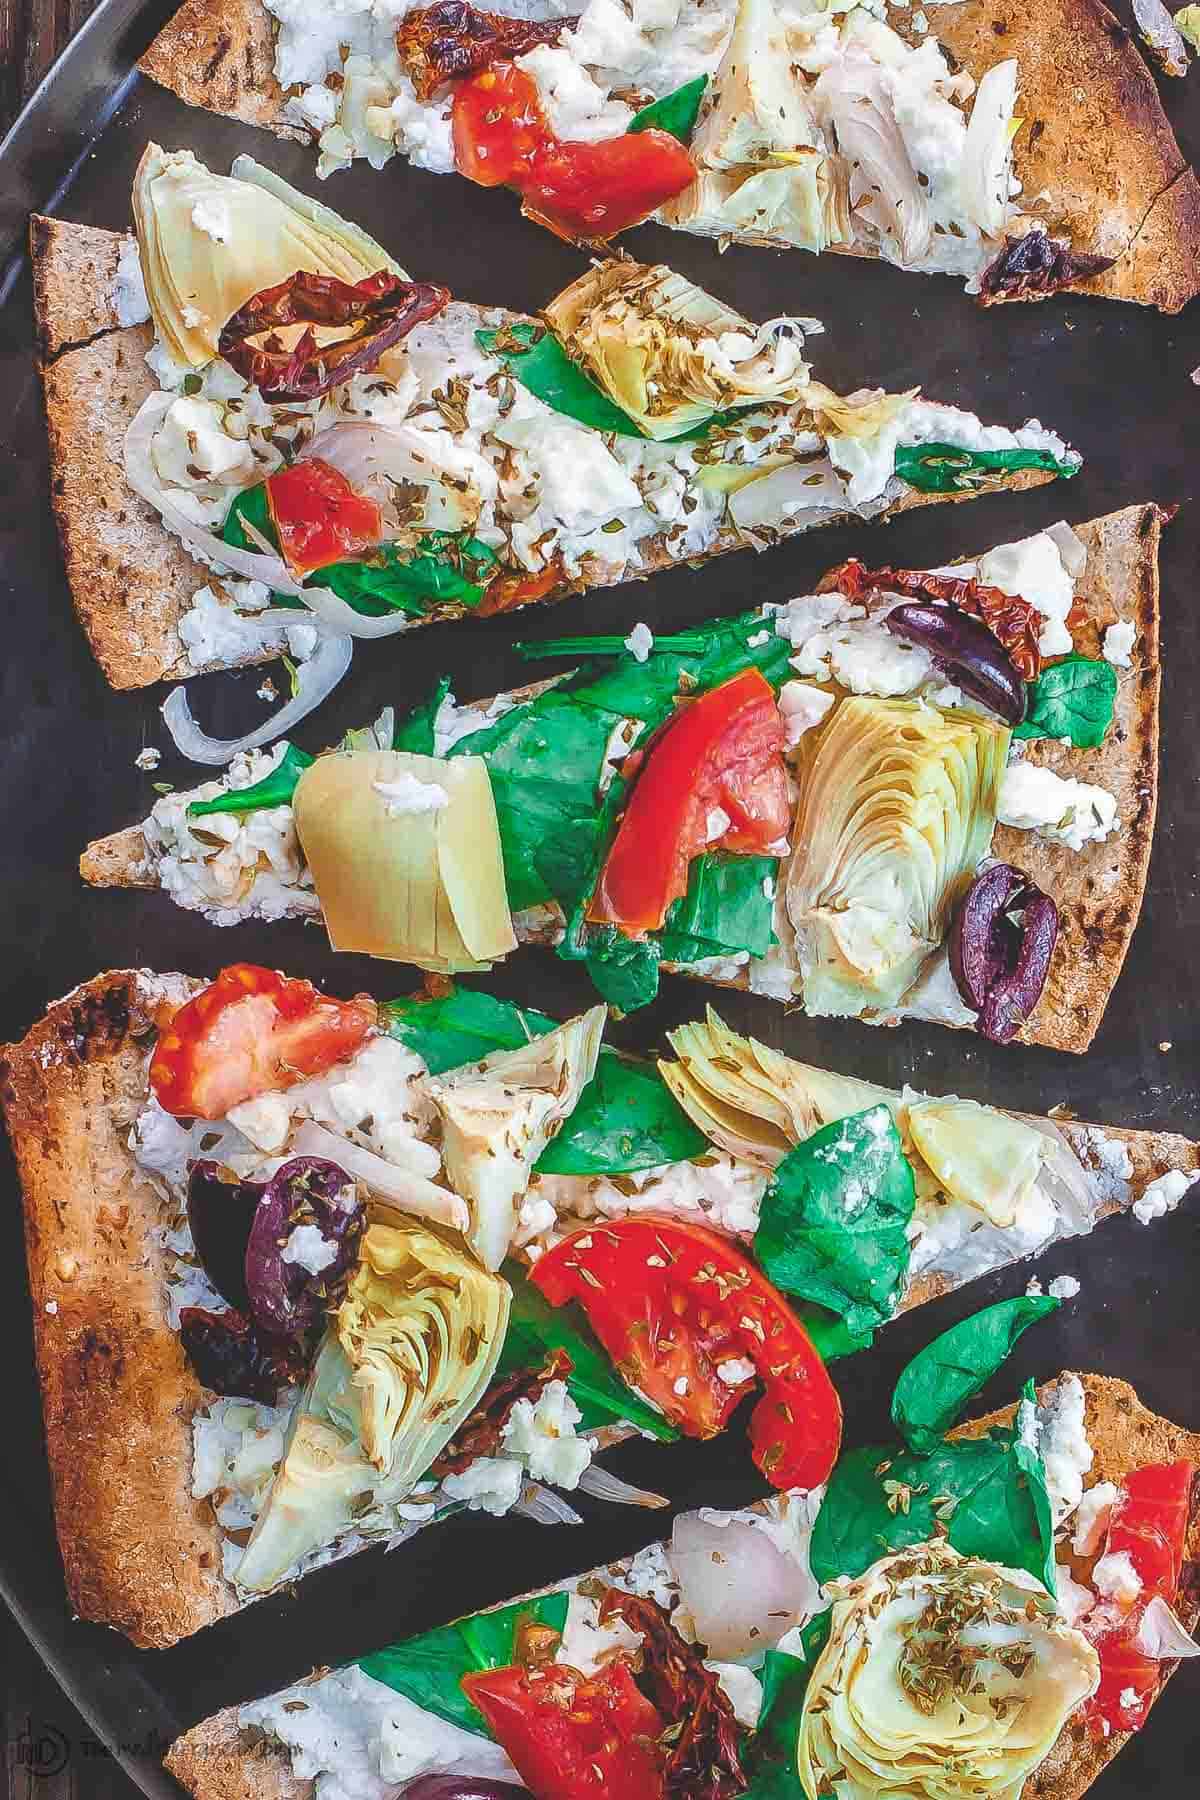 Flatbread pizza with garden vegetables and feta cheese